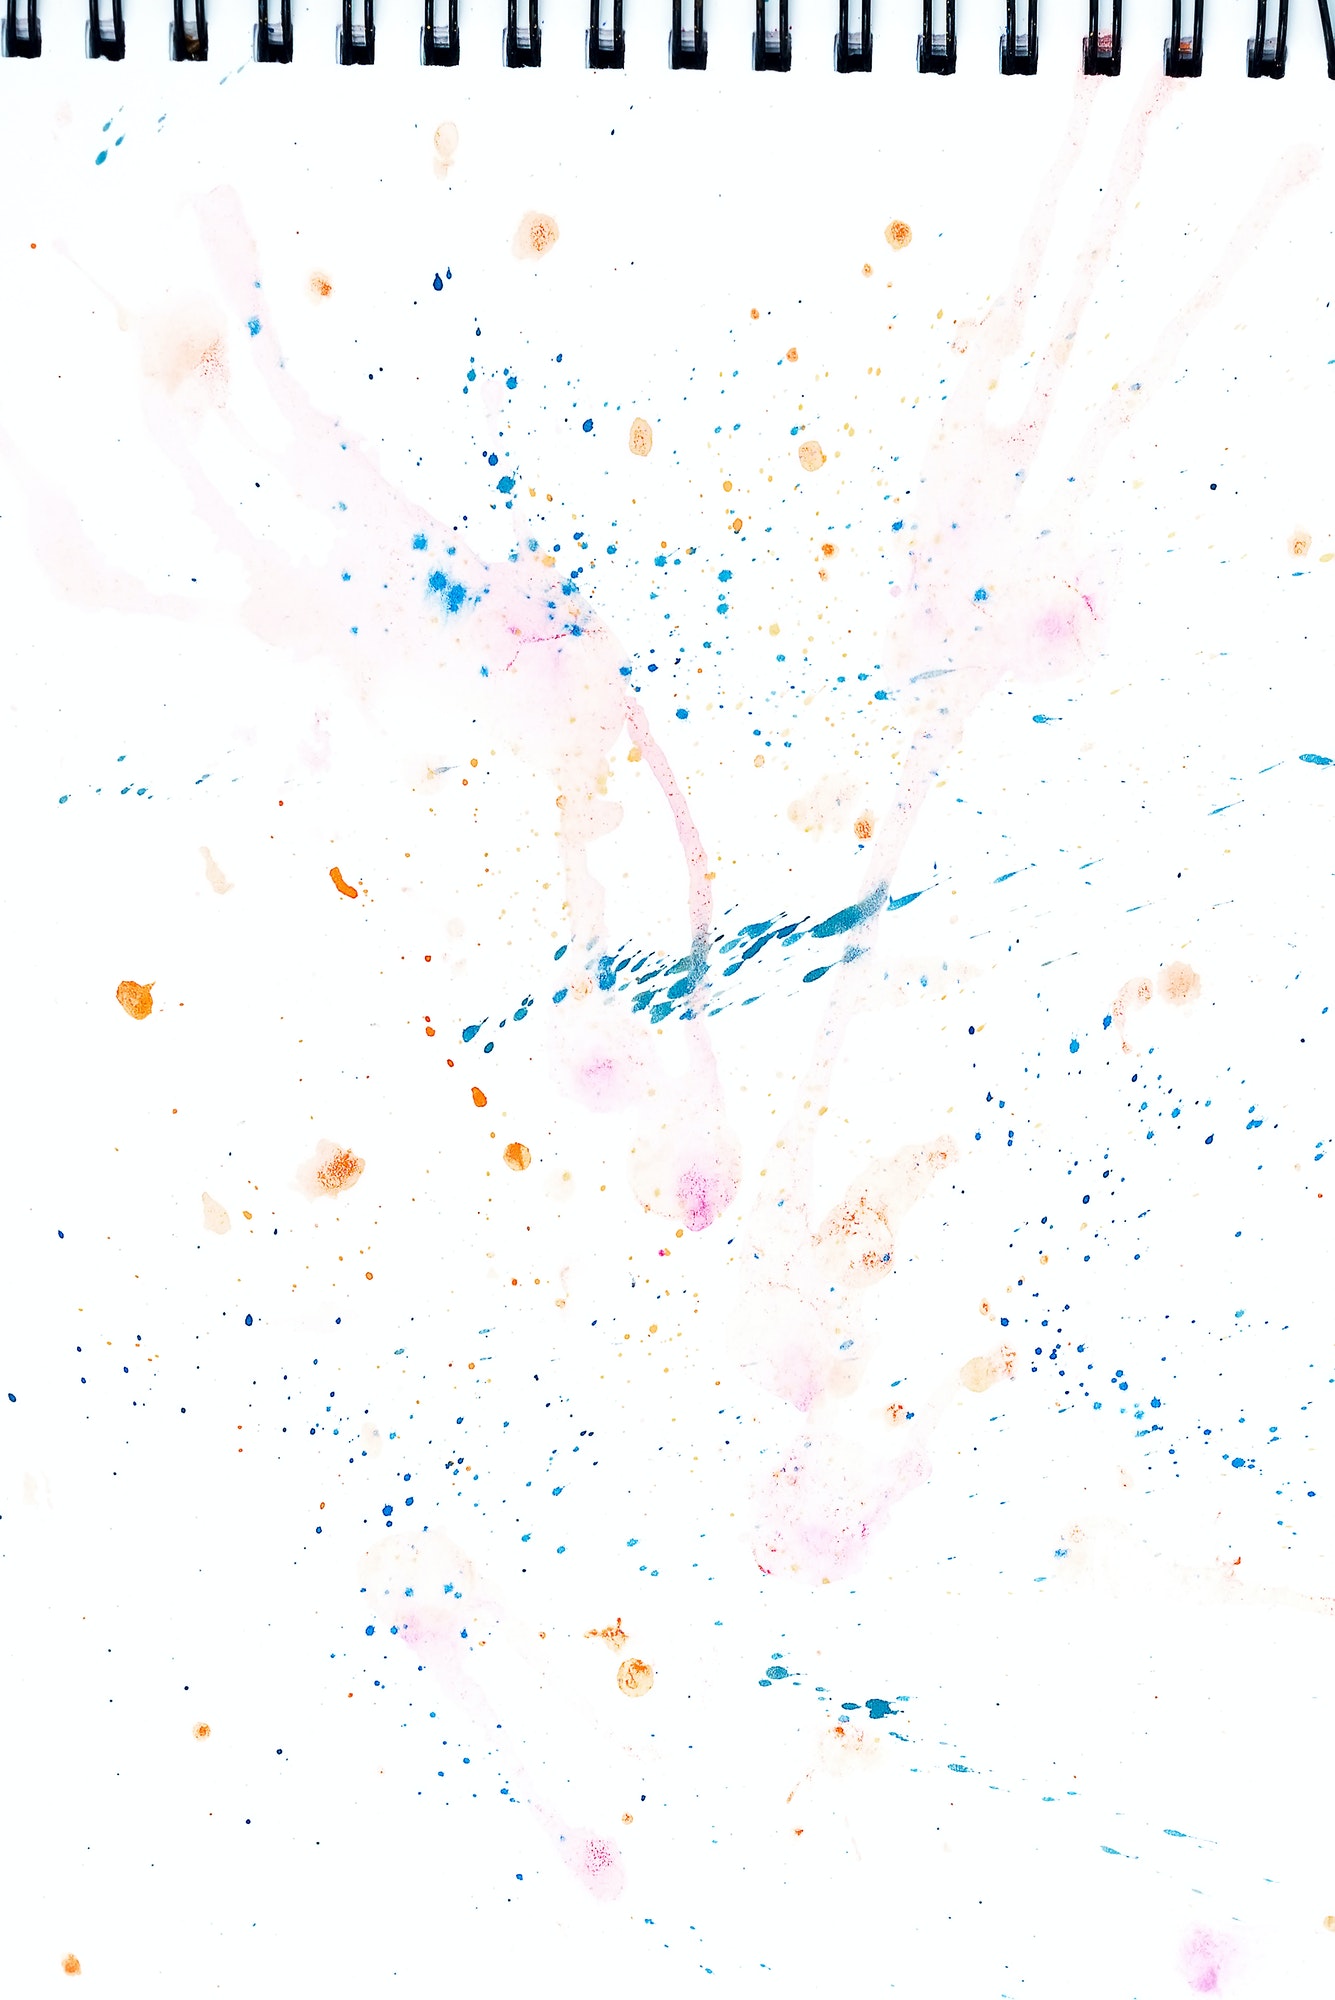 Bright watercolor blue and pink stain drips. Abstract illustration on a white background